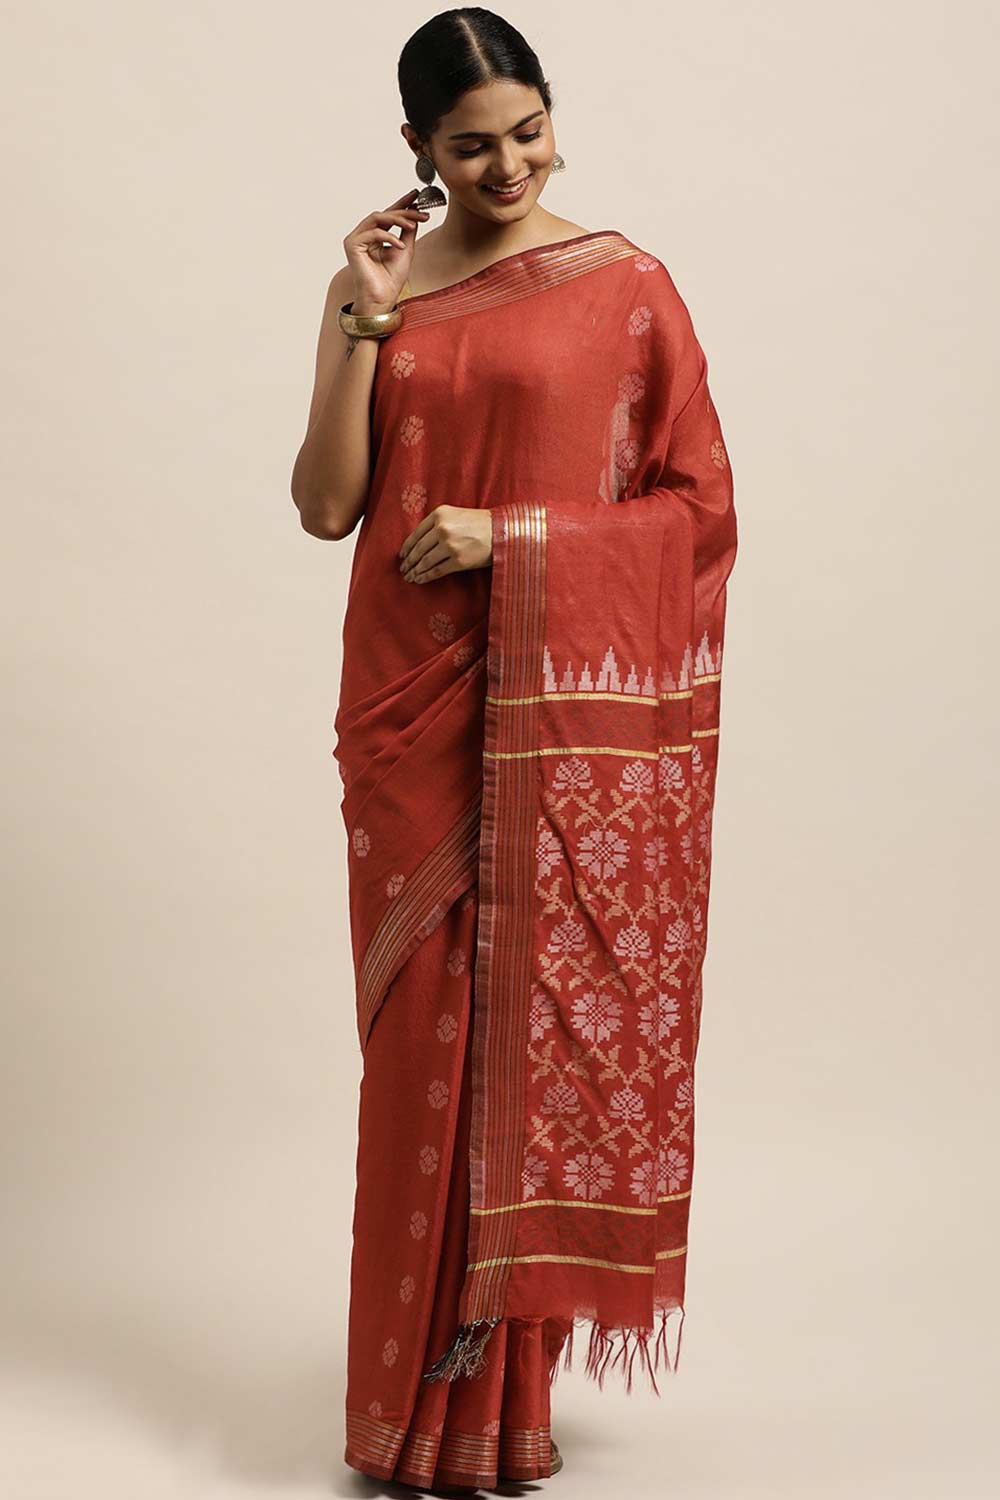 Buy Sheena Red Zari Woven Blended Silk One Minute Saree Online - One Minute Saree